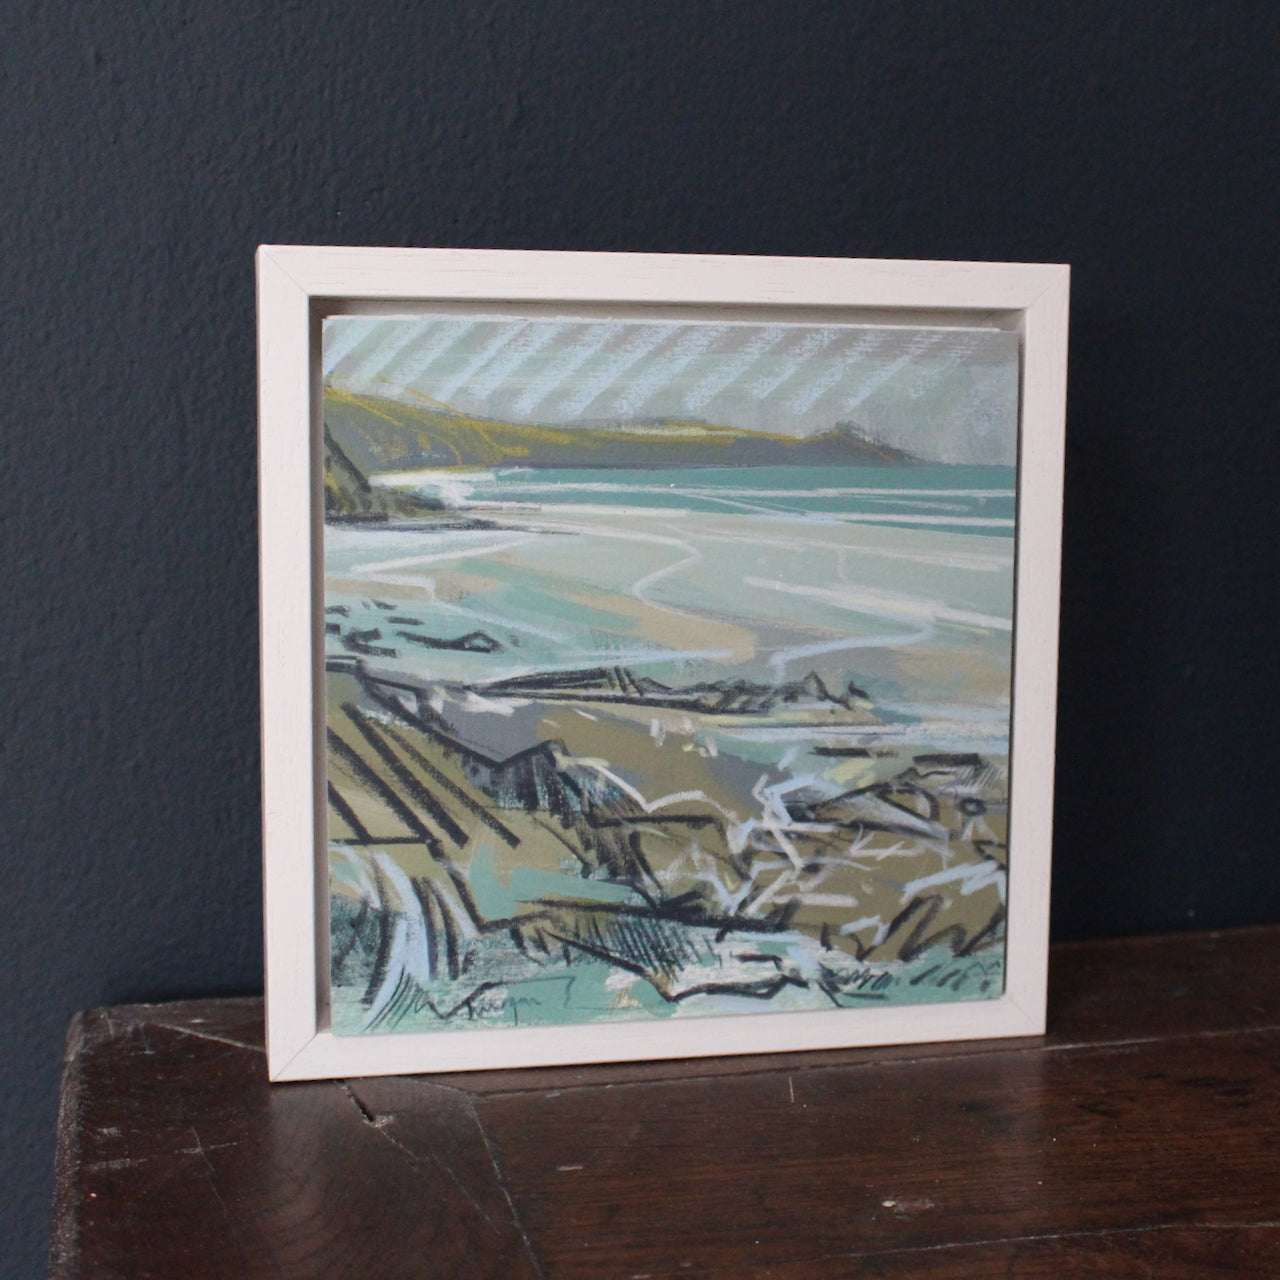 small seascape by Imogen Bone, Cornish artist. The cliffs are green, ochre and black and the sea is pale blue with hints of white and turquoise